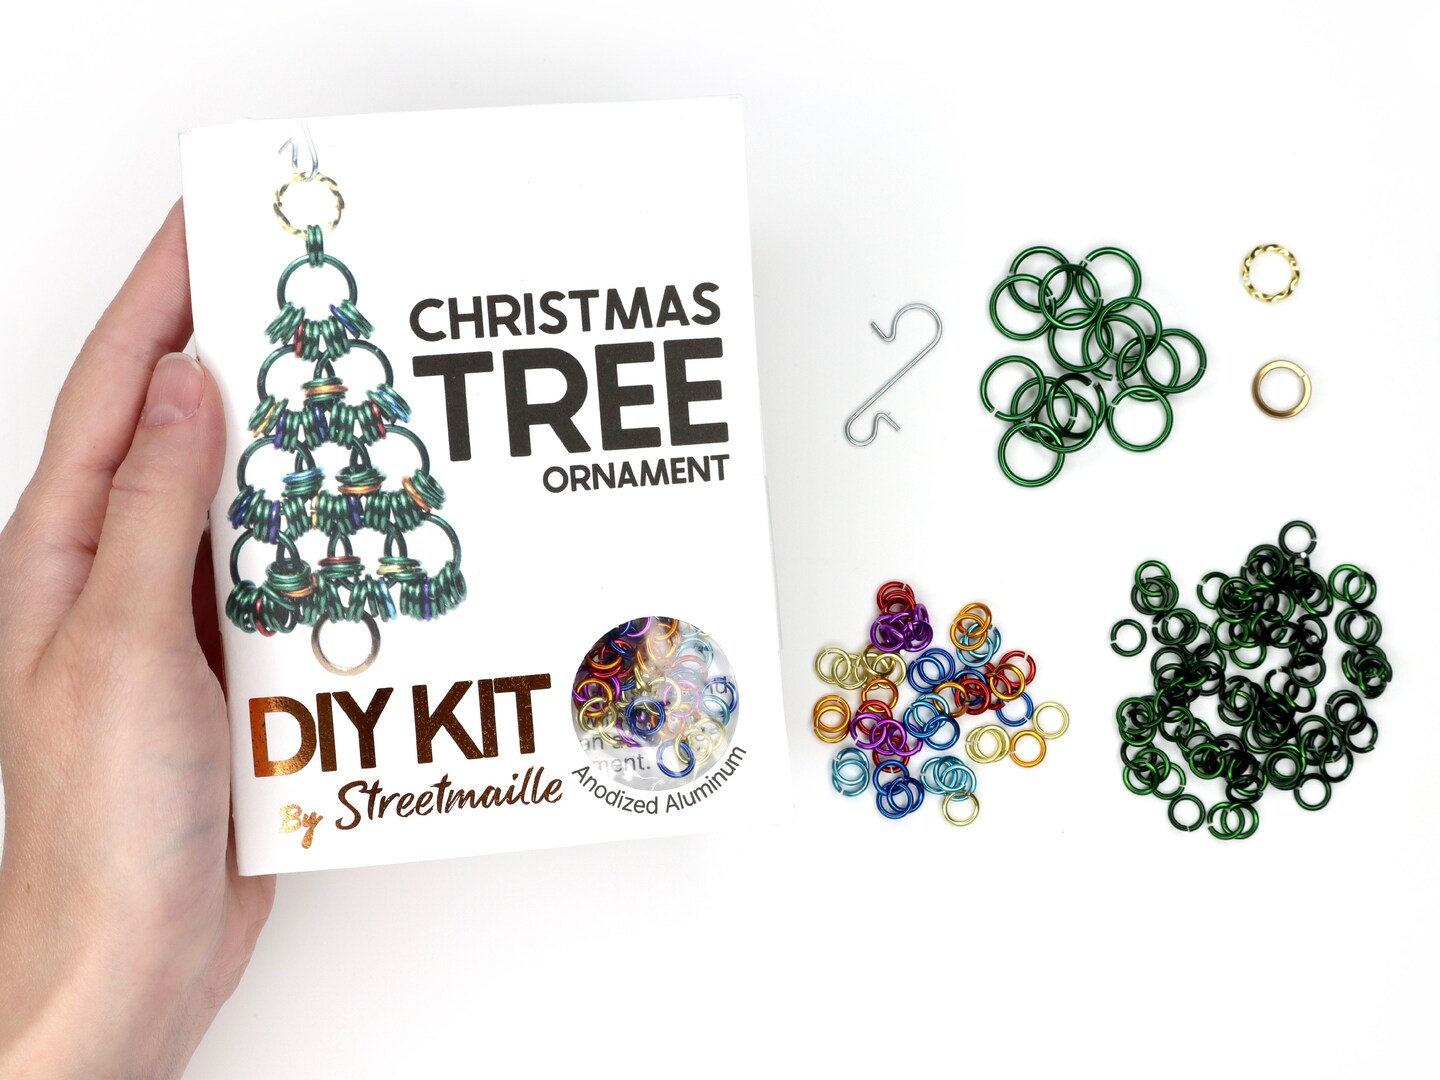 DIY Christmas Tree Ornament Kit, Craft a Festive Holiday Pine Tree from  Included Supplies and Tutorial with this Beginner DIY Chainmail Kit